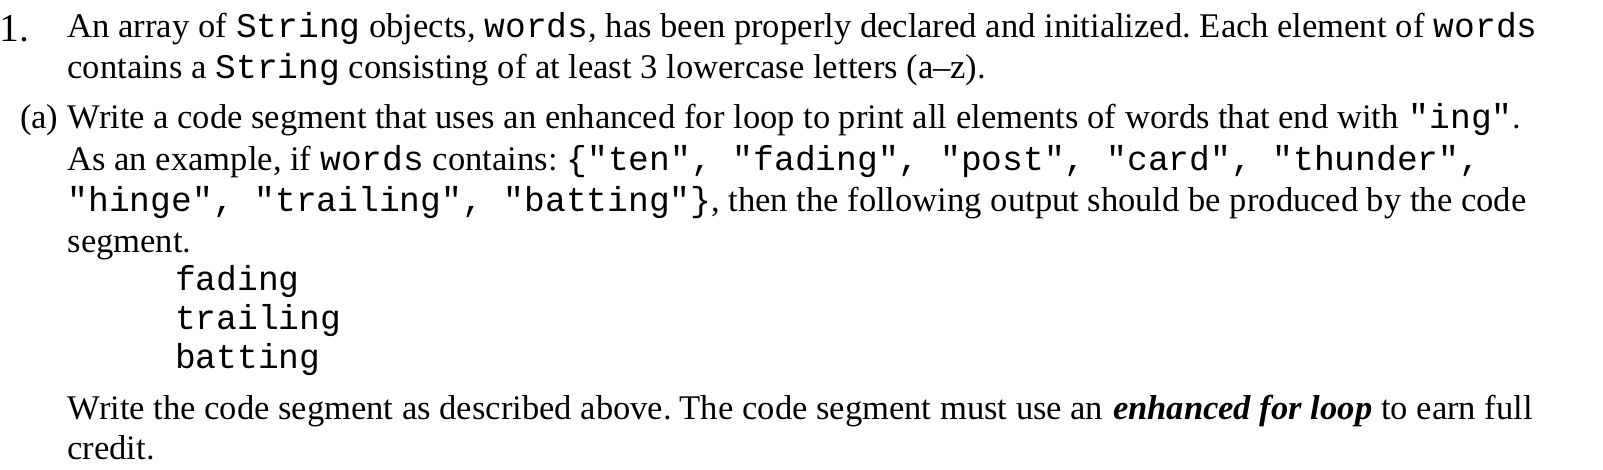 1. An array of String objects, words, has been properly declared and initialized. Each element of words